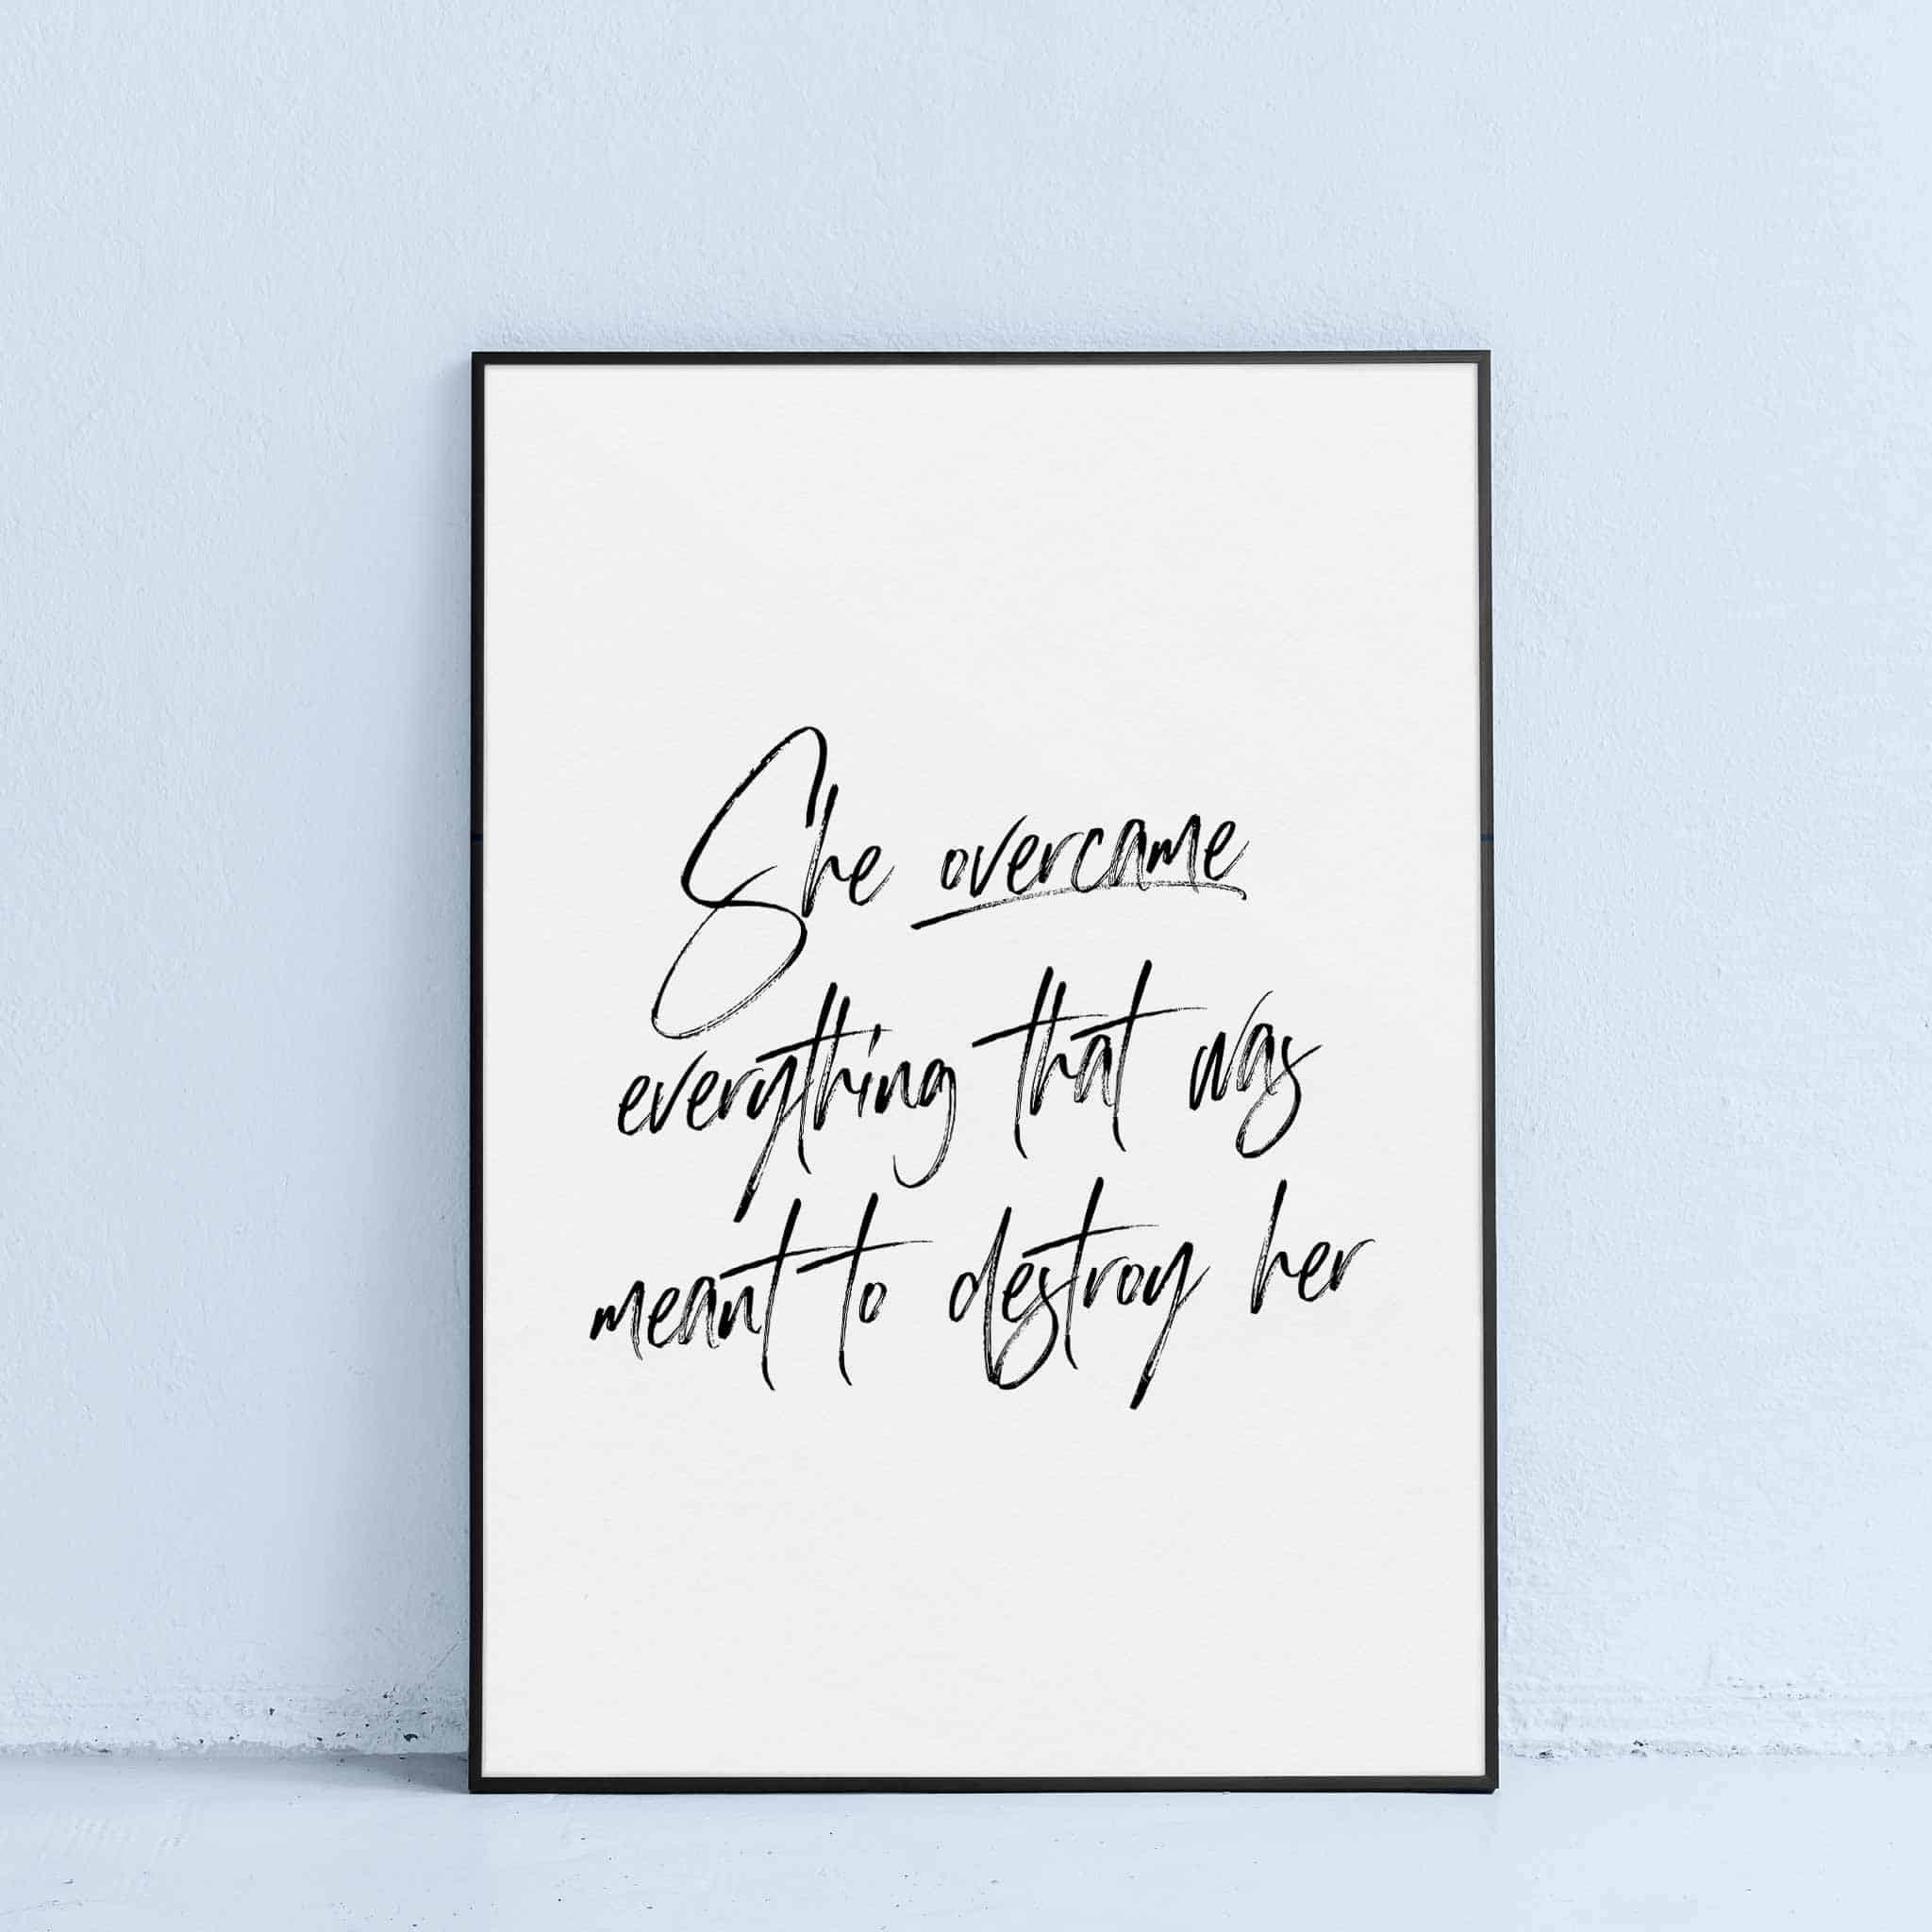 printable wall art with she overcame everything inspirational quote to print at home